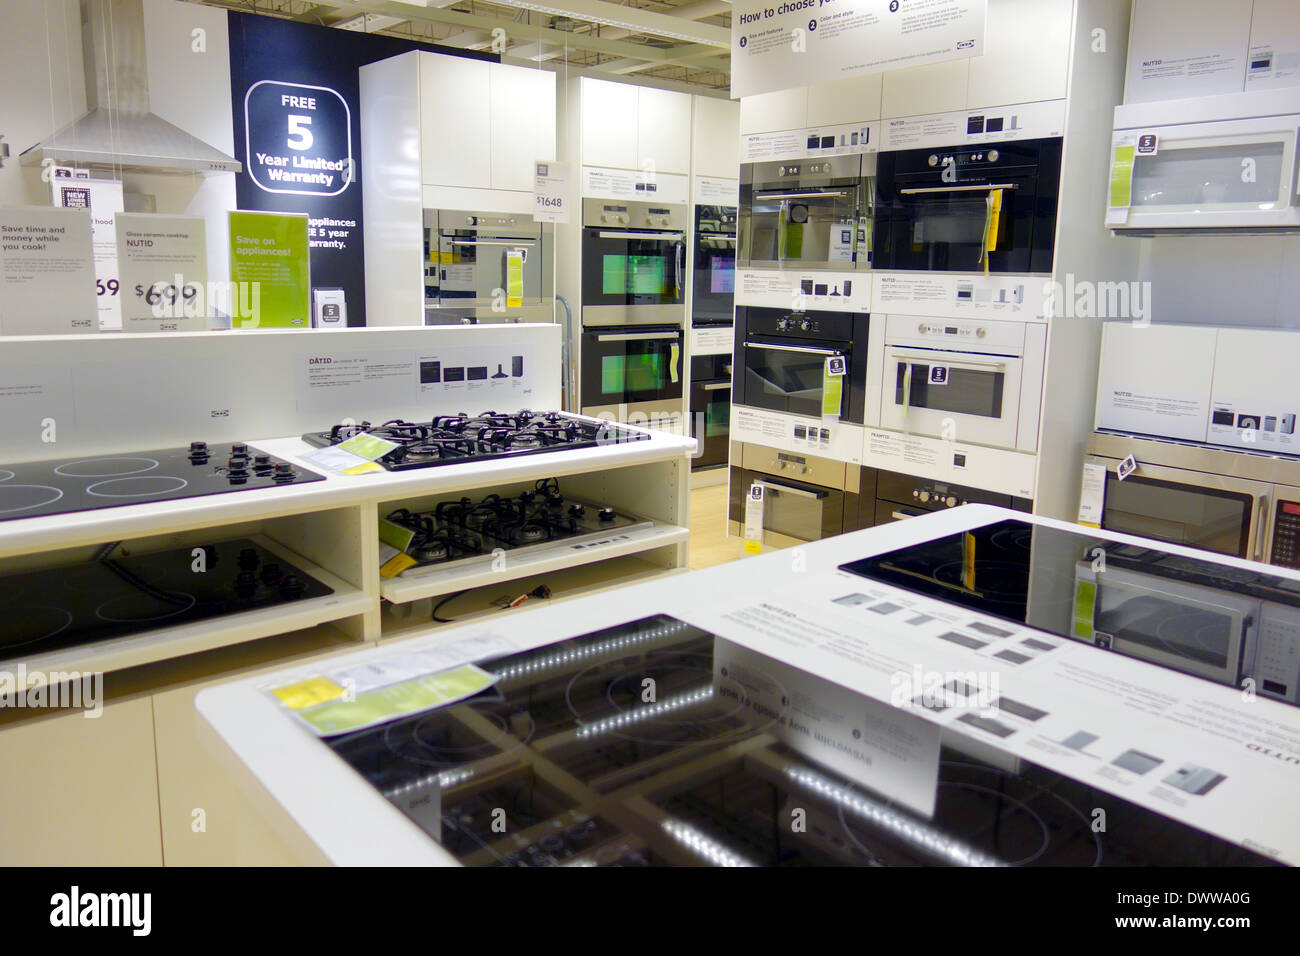 Kitchen appliances at an Ikea store in Toronto, Canada Stock Photo